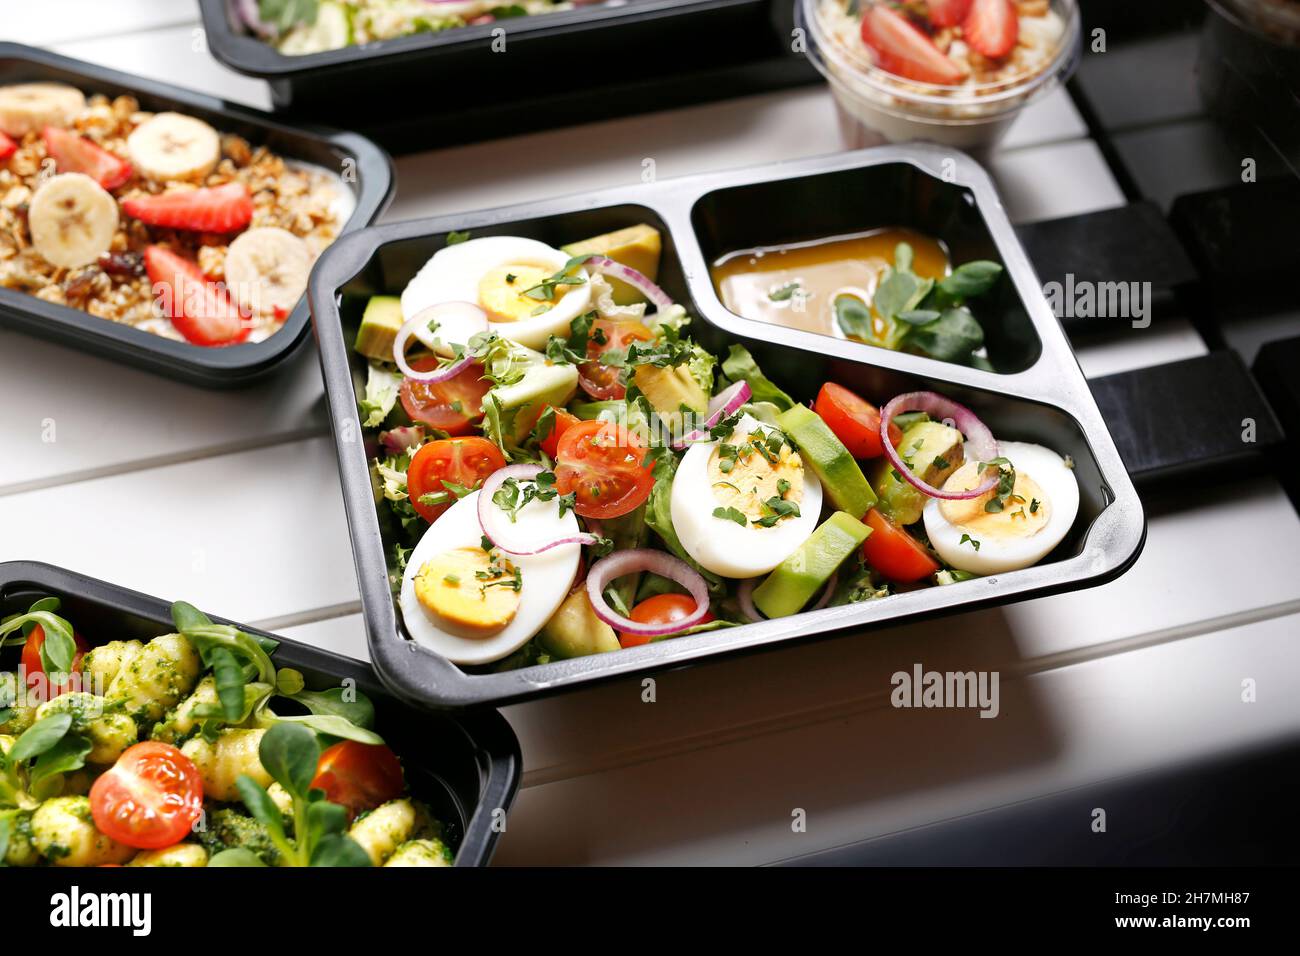 Diet box with egg and avocado salad, appetizing take-away meal. Appetizing ready-to-go dish served in a disposable box. Culinary photography.y photog Stock Photo